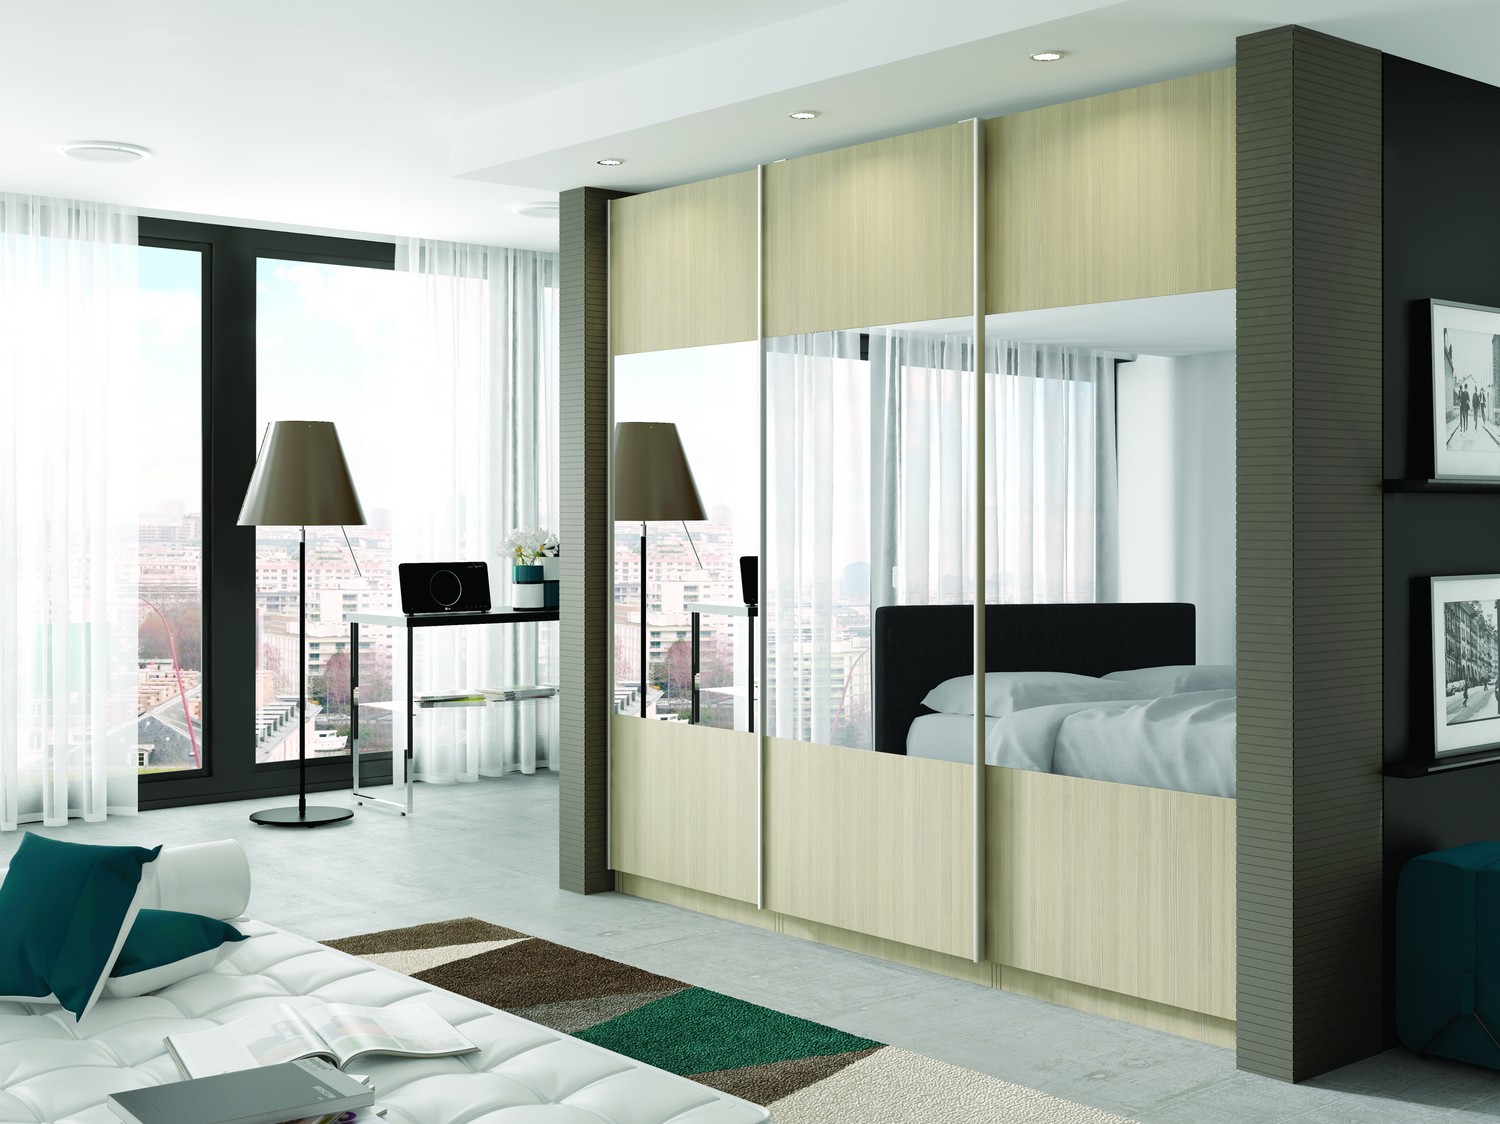 Beech woodgrain sliding wardrobe design with mirrored sections designed for a client’s bedroom in Liverpool city centre. The sliding wardrobe features our effortless glide system and has been manufactured to fit within a pre-existing alcove. 